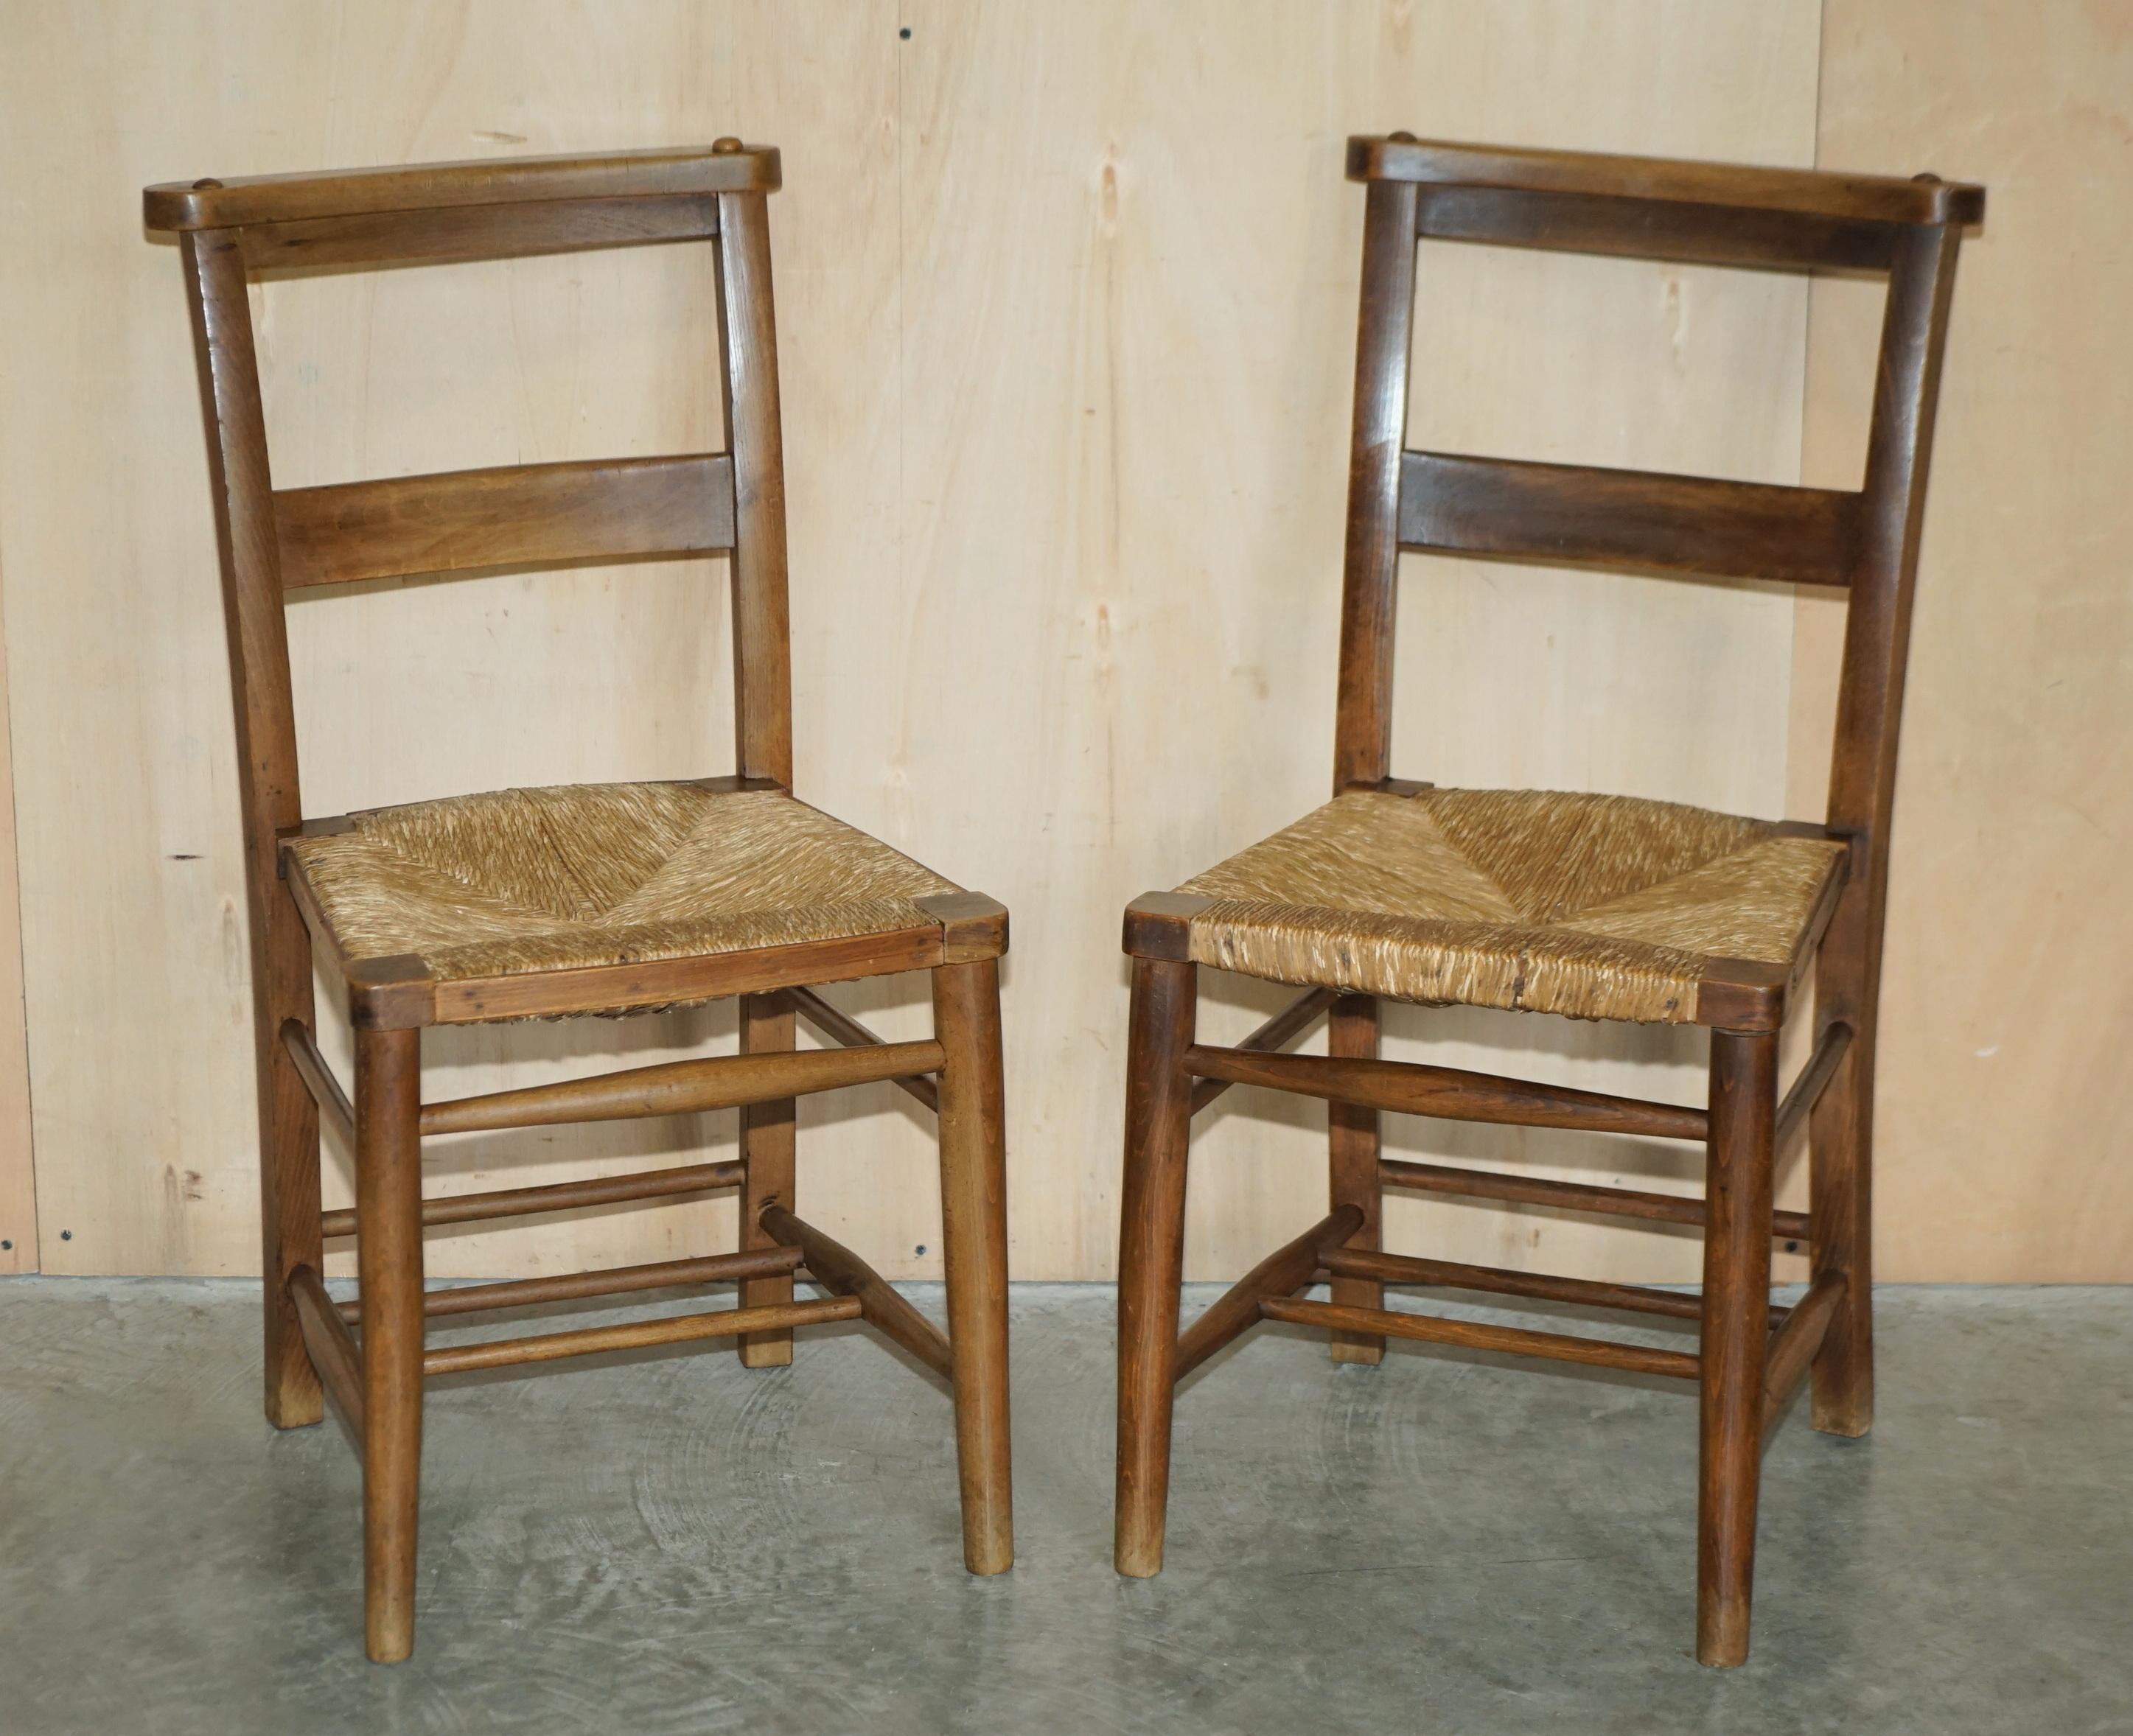 We are delighted to offer for sale this lovely suite of six original Dutch circa 1860 Ladder back rush seat dining chairs.

A very good looking and well-made suite, the timber is all solid oak, the seats the original rush woven straw, these are